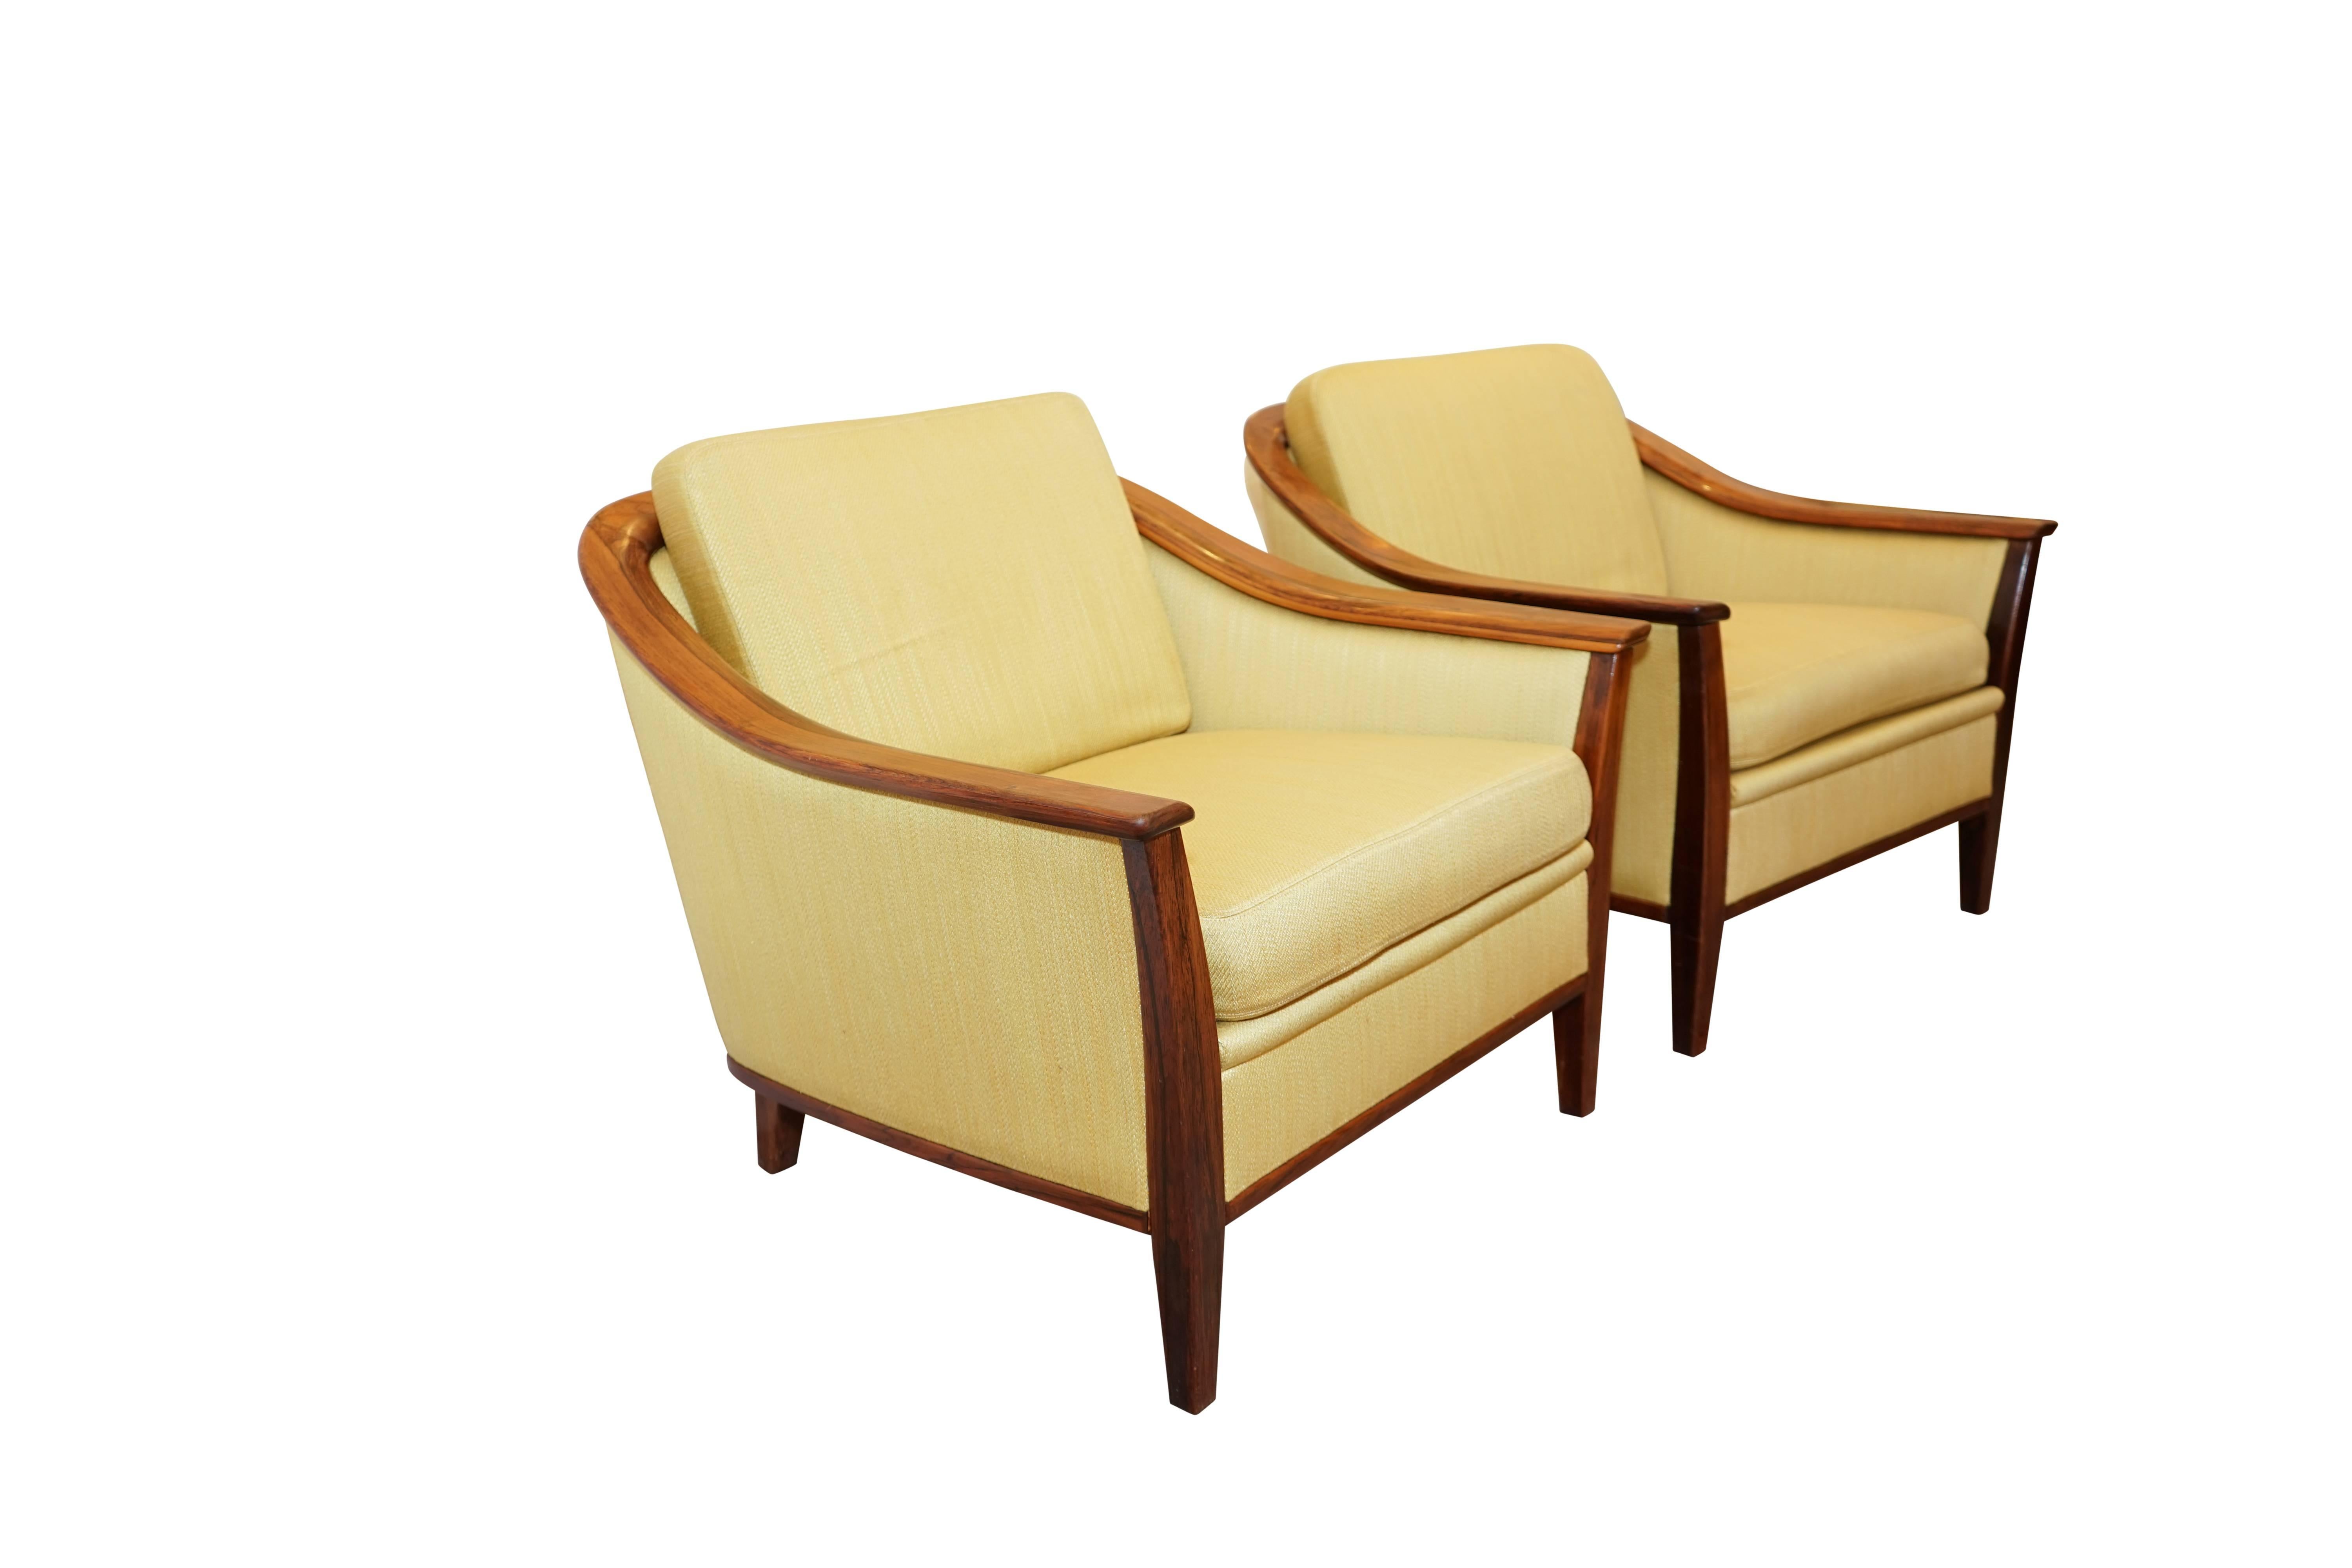 Sleekly Swedish, this ensemble is as comfortable as it is beautiful. Framed in solid jacaranda and bearing the original honey toned upholstery, the set is also offered as a pair of chairs or the sofa independently. Please contact us for separate